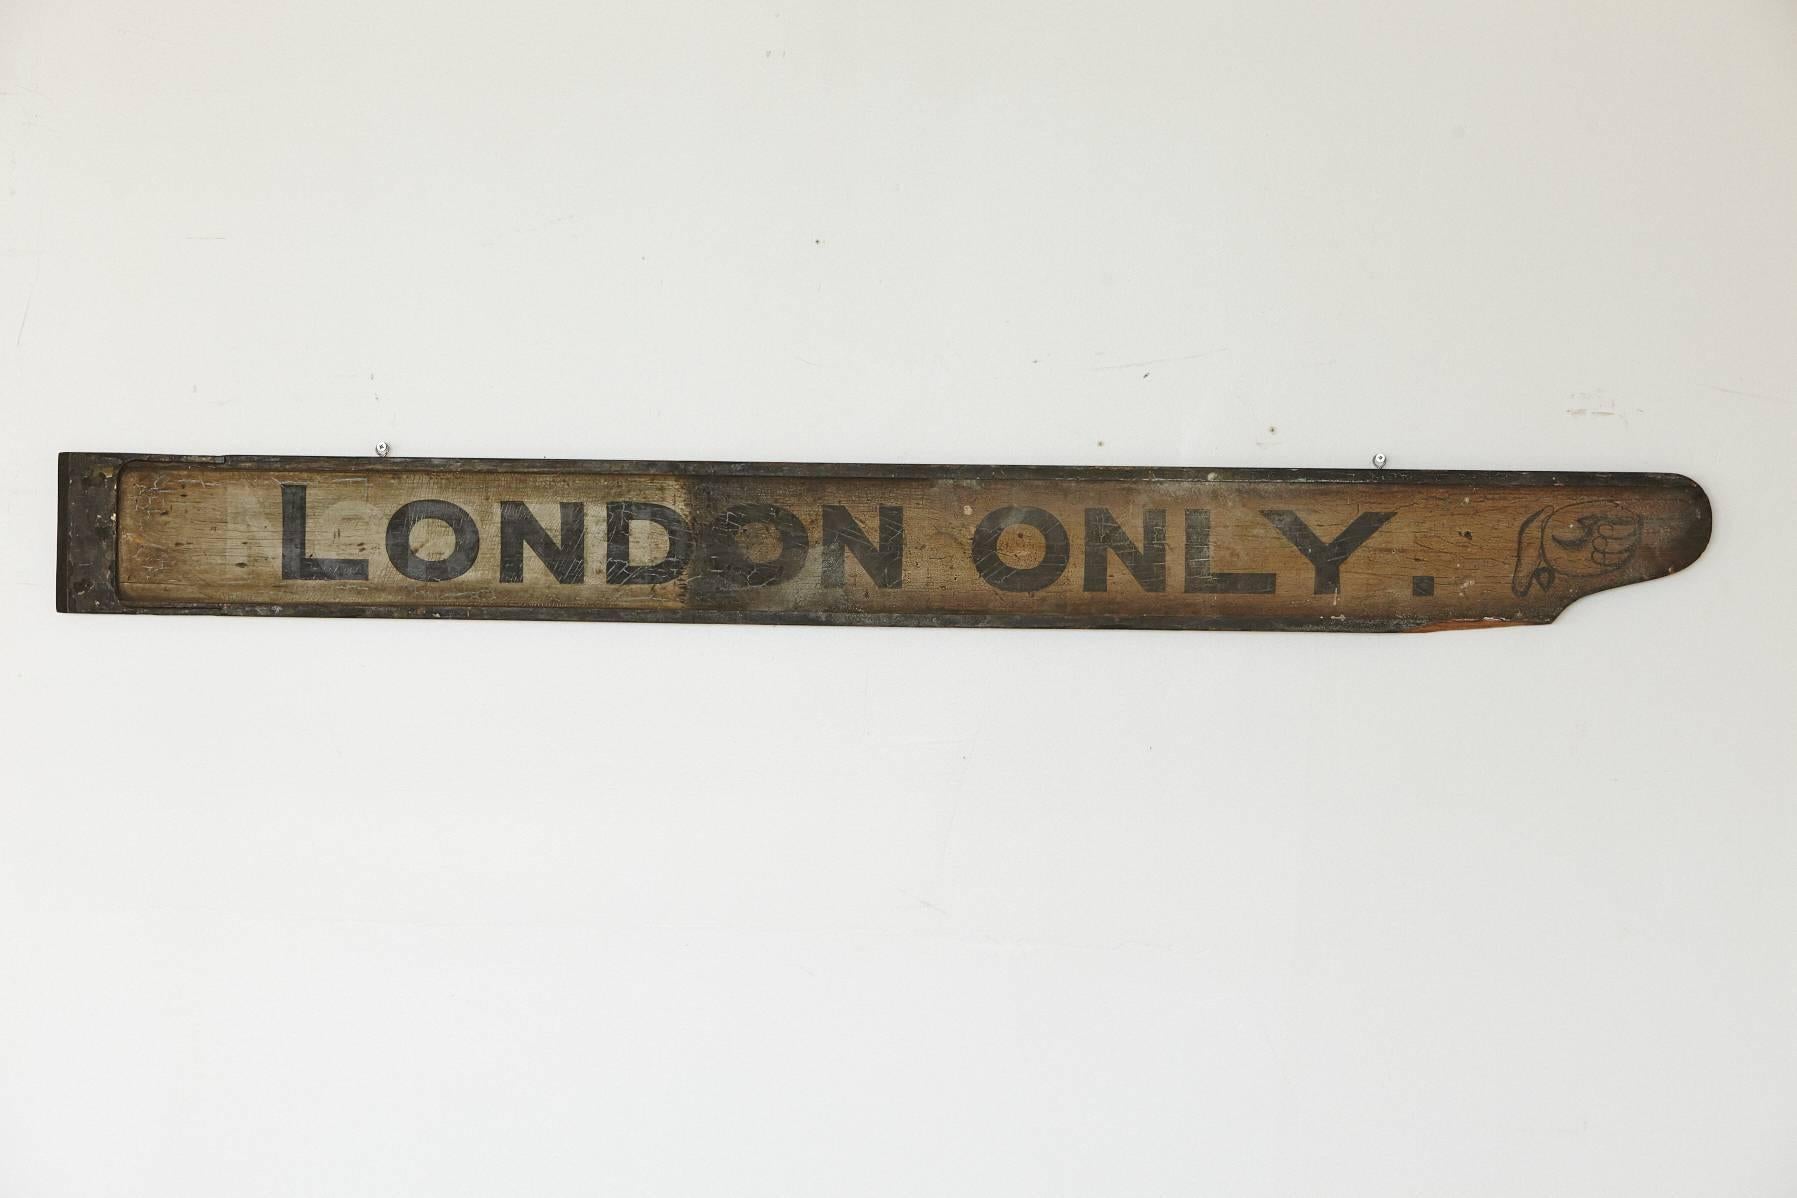 Antique wood and iron double-sided train station sign - LONDON ONLY.
Original sign with beautiful patina, circa 1920s.
Can be hung from top, so that both sides are visible.